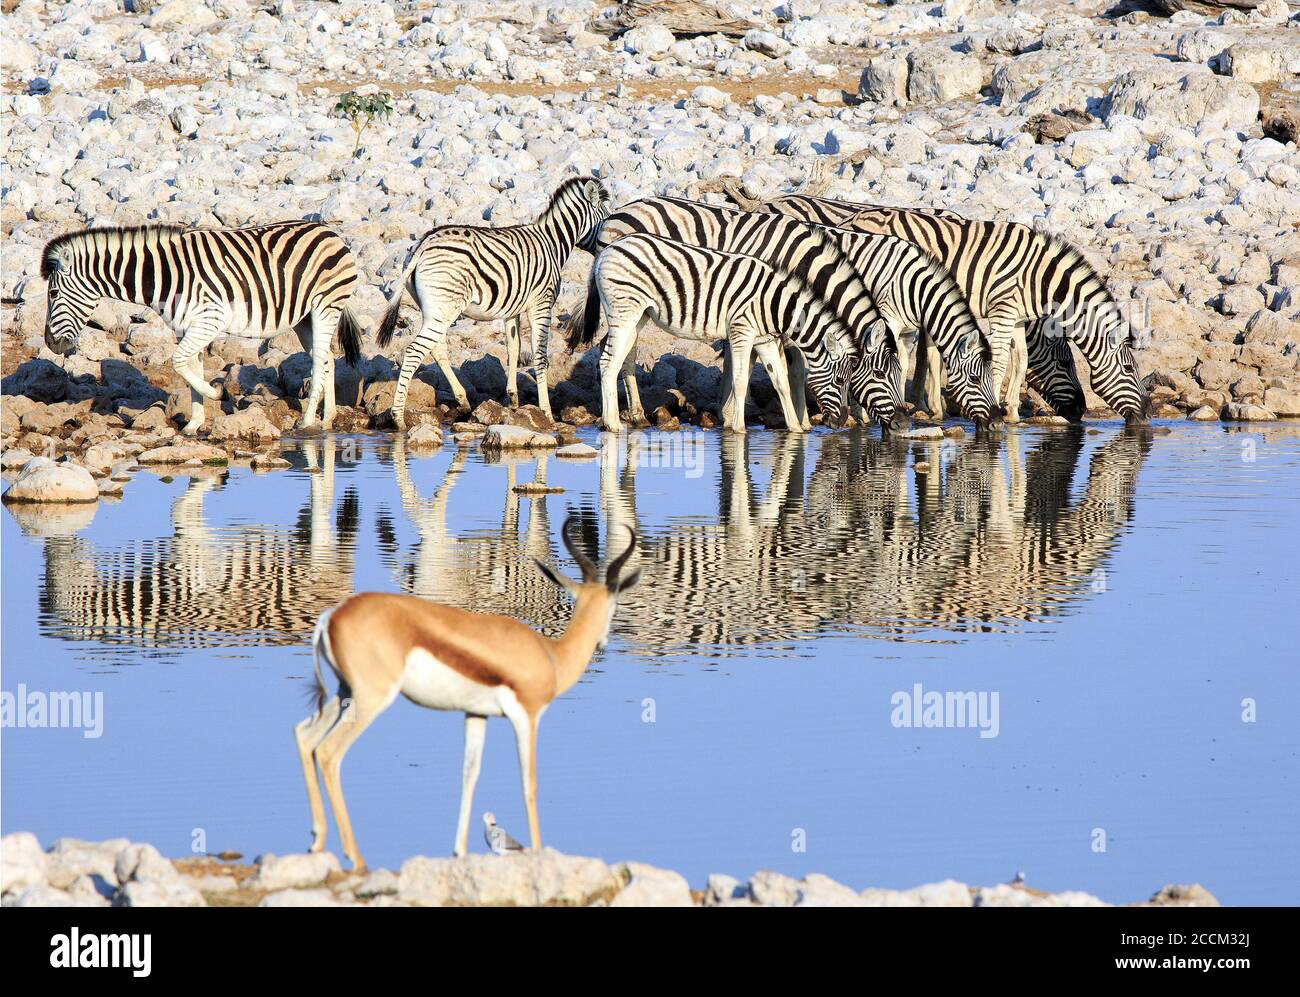 Dazzle of Zebra with heads down drinking from a waterhole with good reflection, there is an Out of Focus Impala on the opposite shoreline watching. Stock Photo